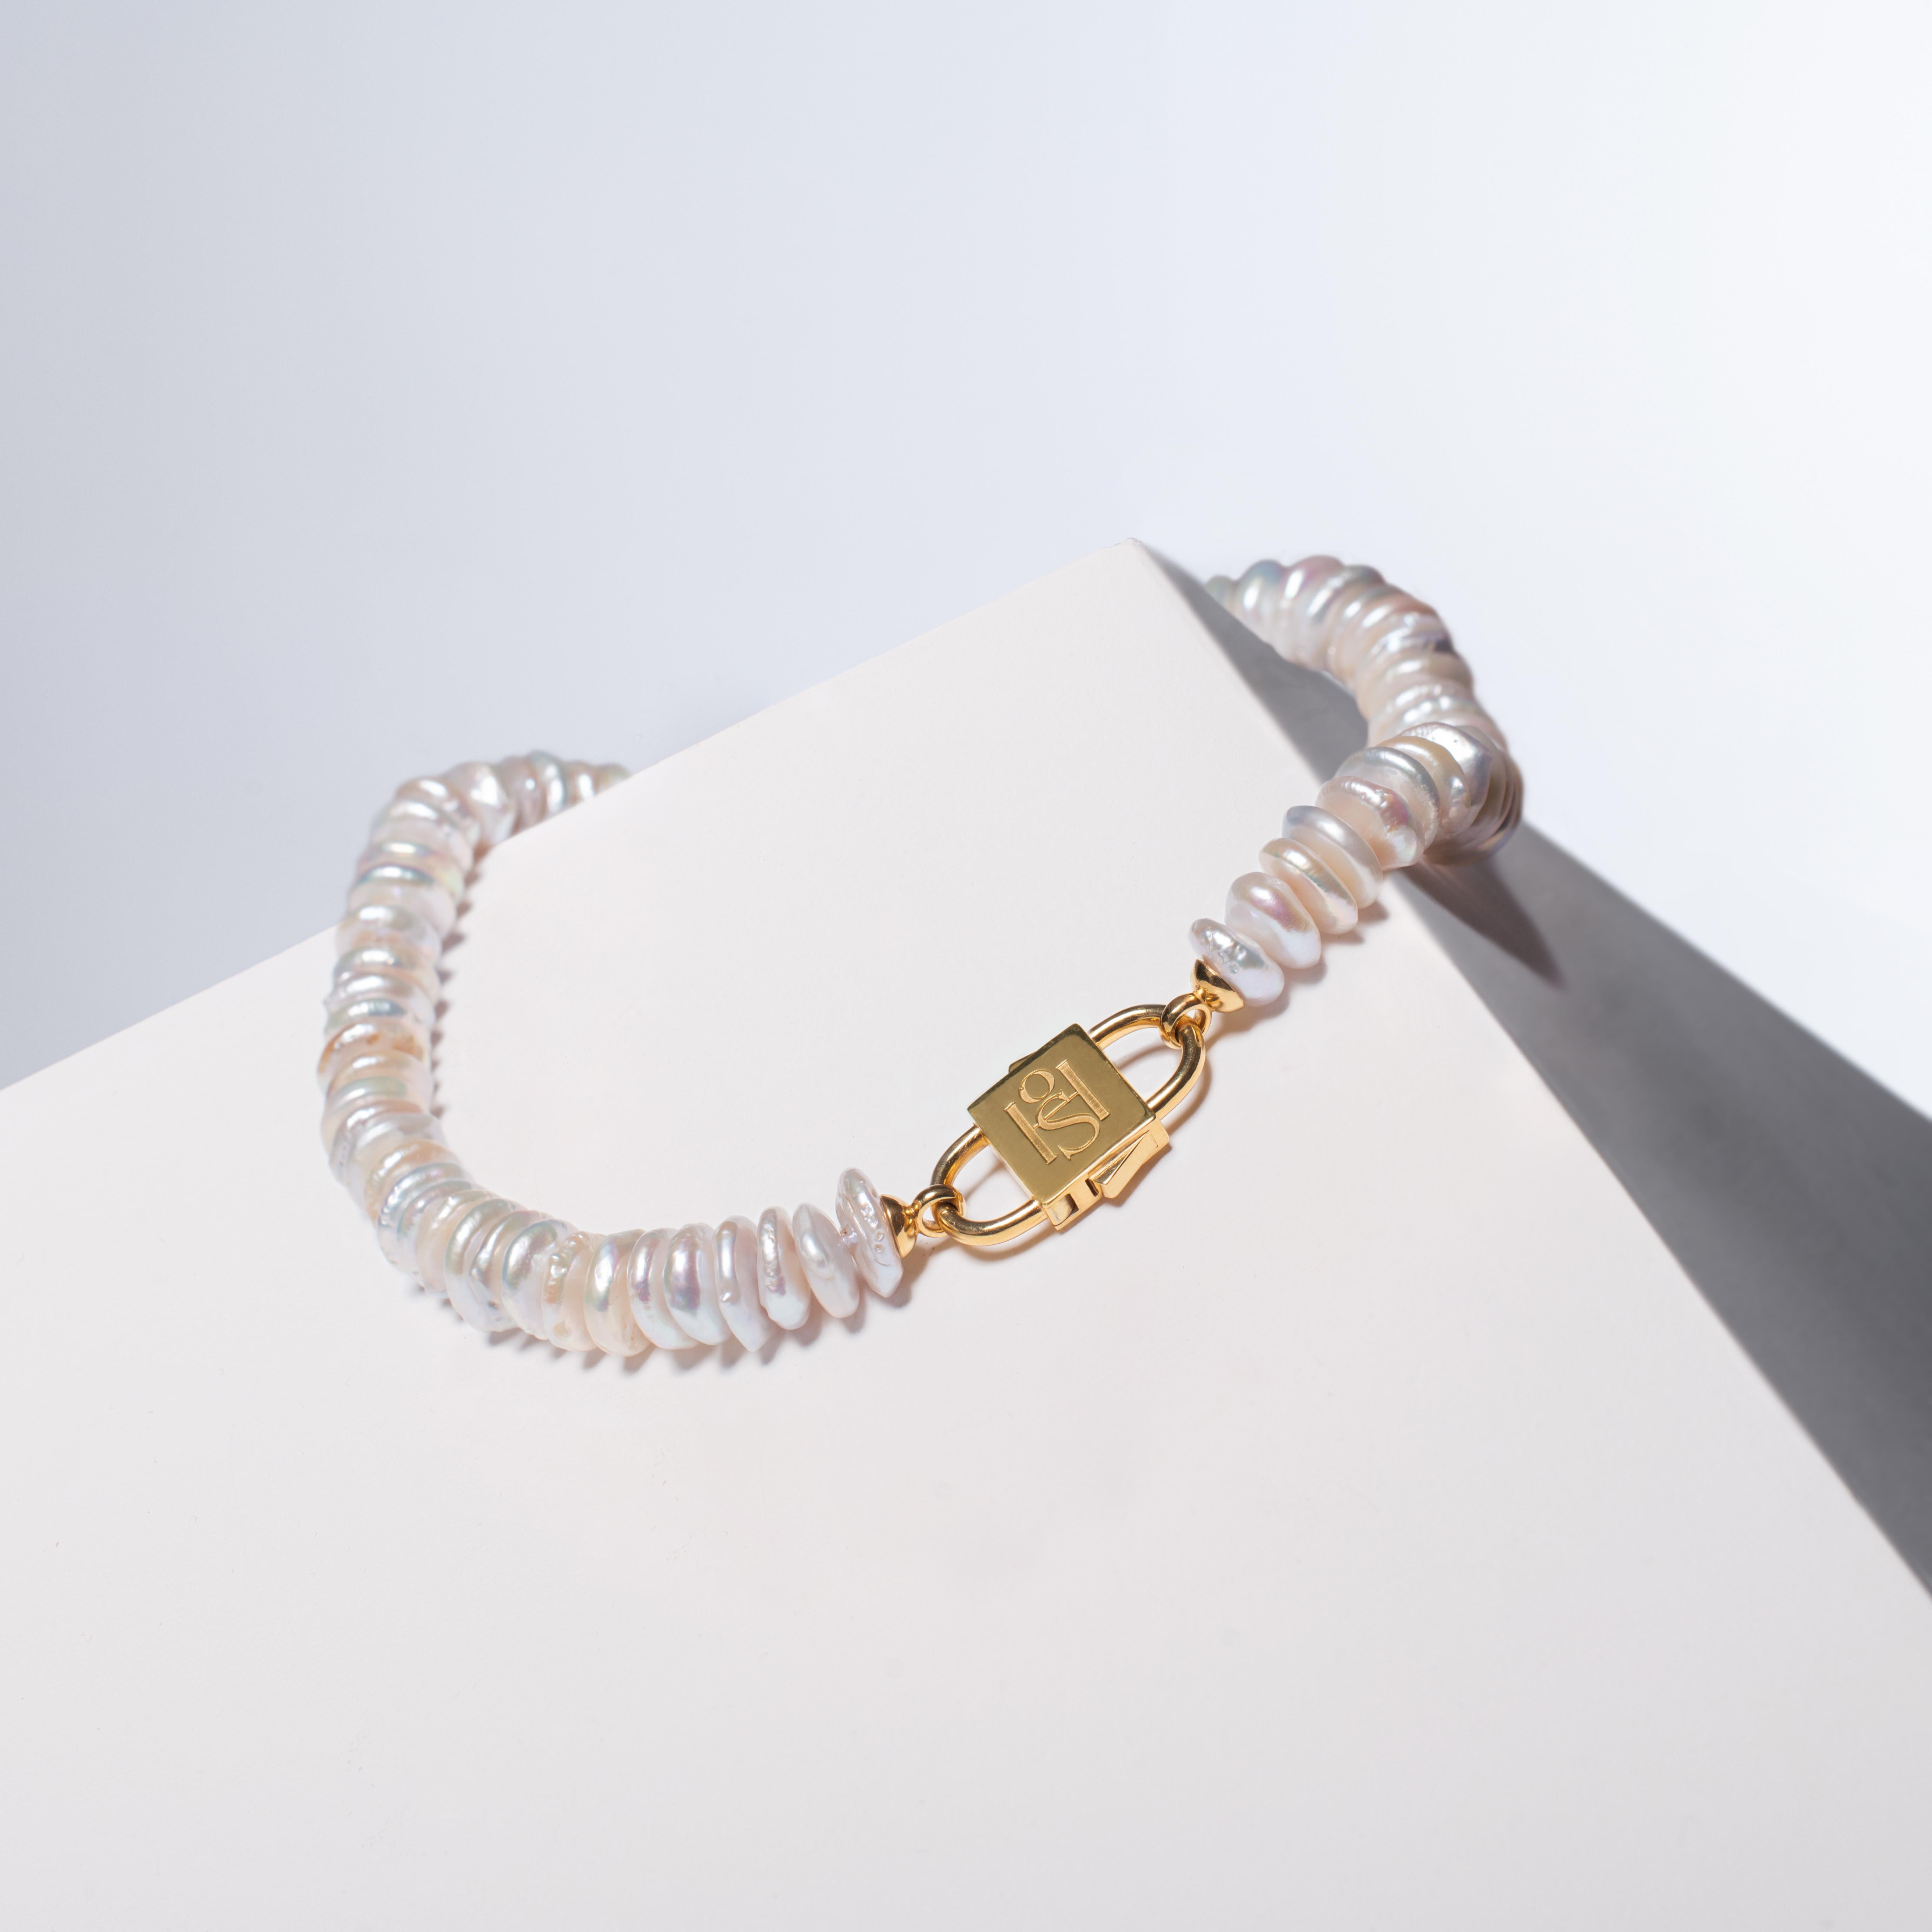 - A refined combination of high-quality, rare rondelle pearls paired with the signature HoS Lock, embodying elegance and exclusivity.
- Rondelle pearl string measures 42 cm (16.5 inches), offering a classic and comfortable length.
- The HoS Lock™,